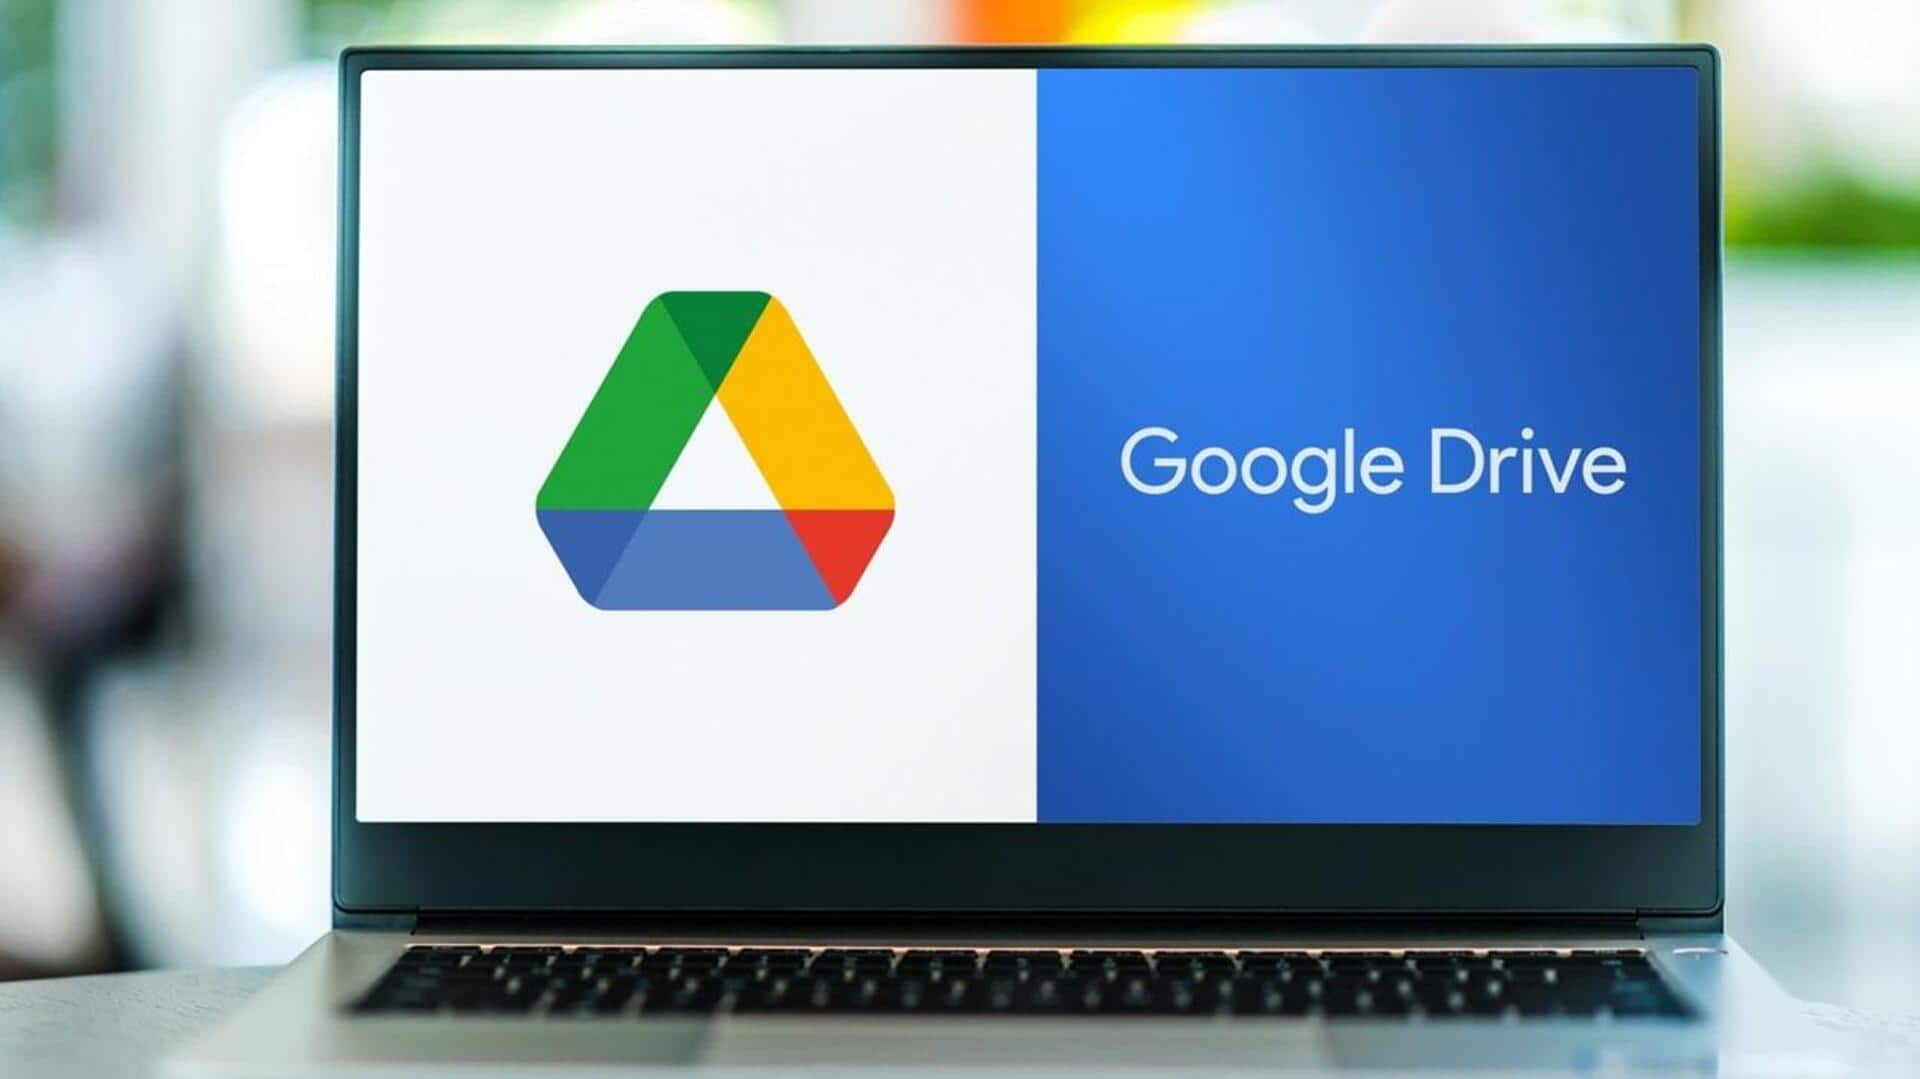 Google Drive overhauls home page with advanced search capabilities